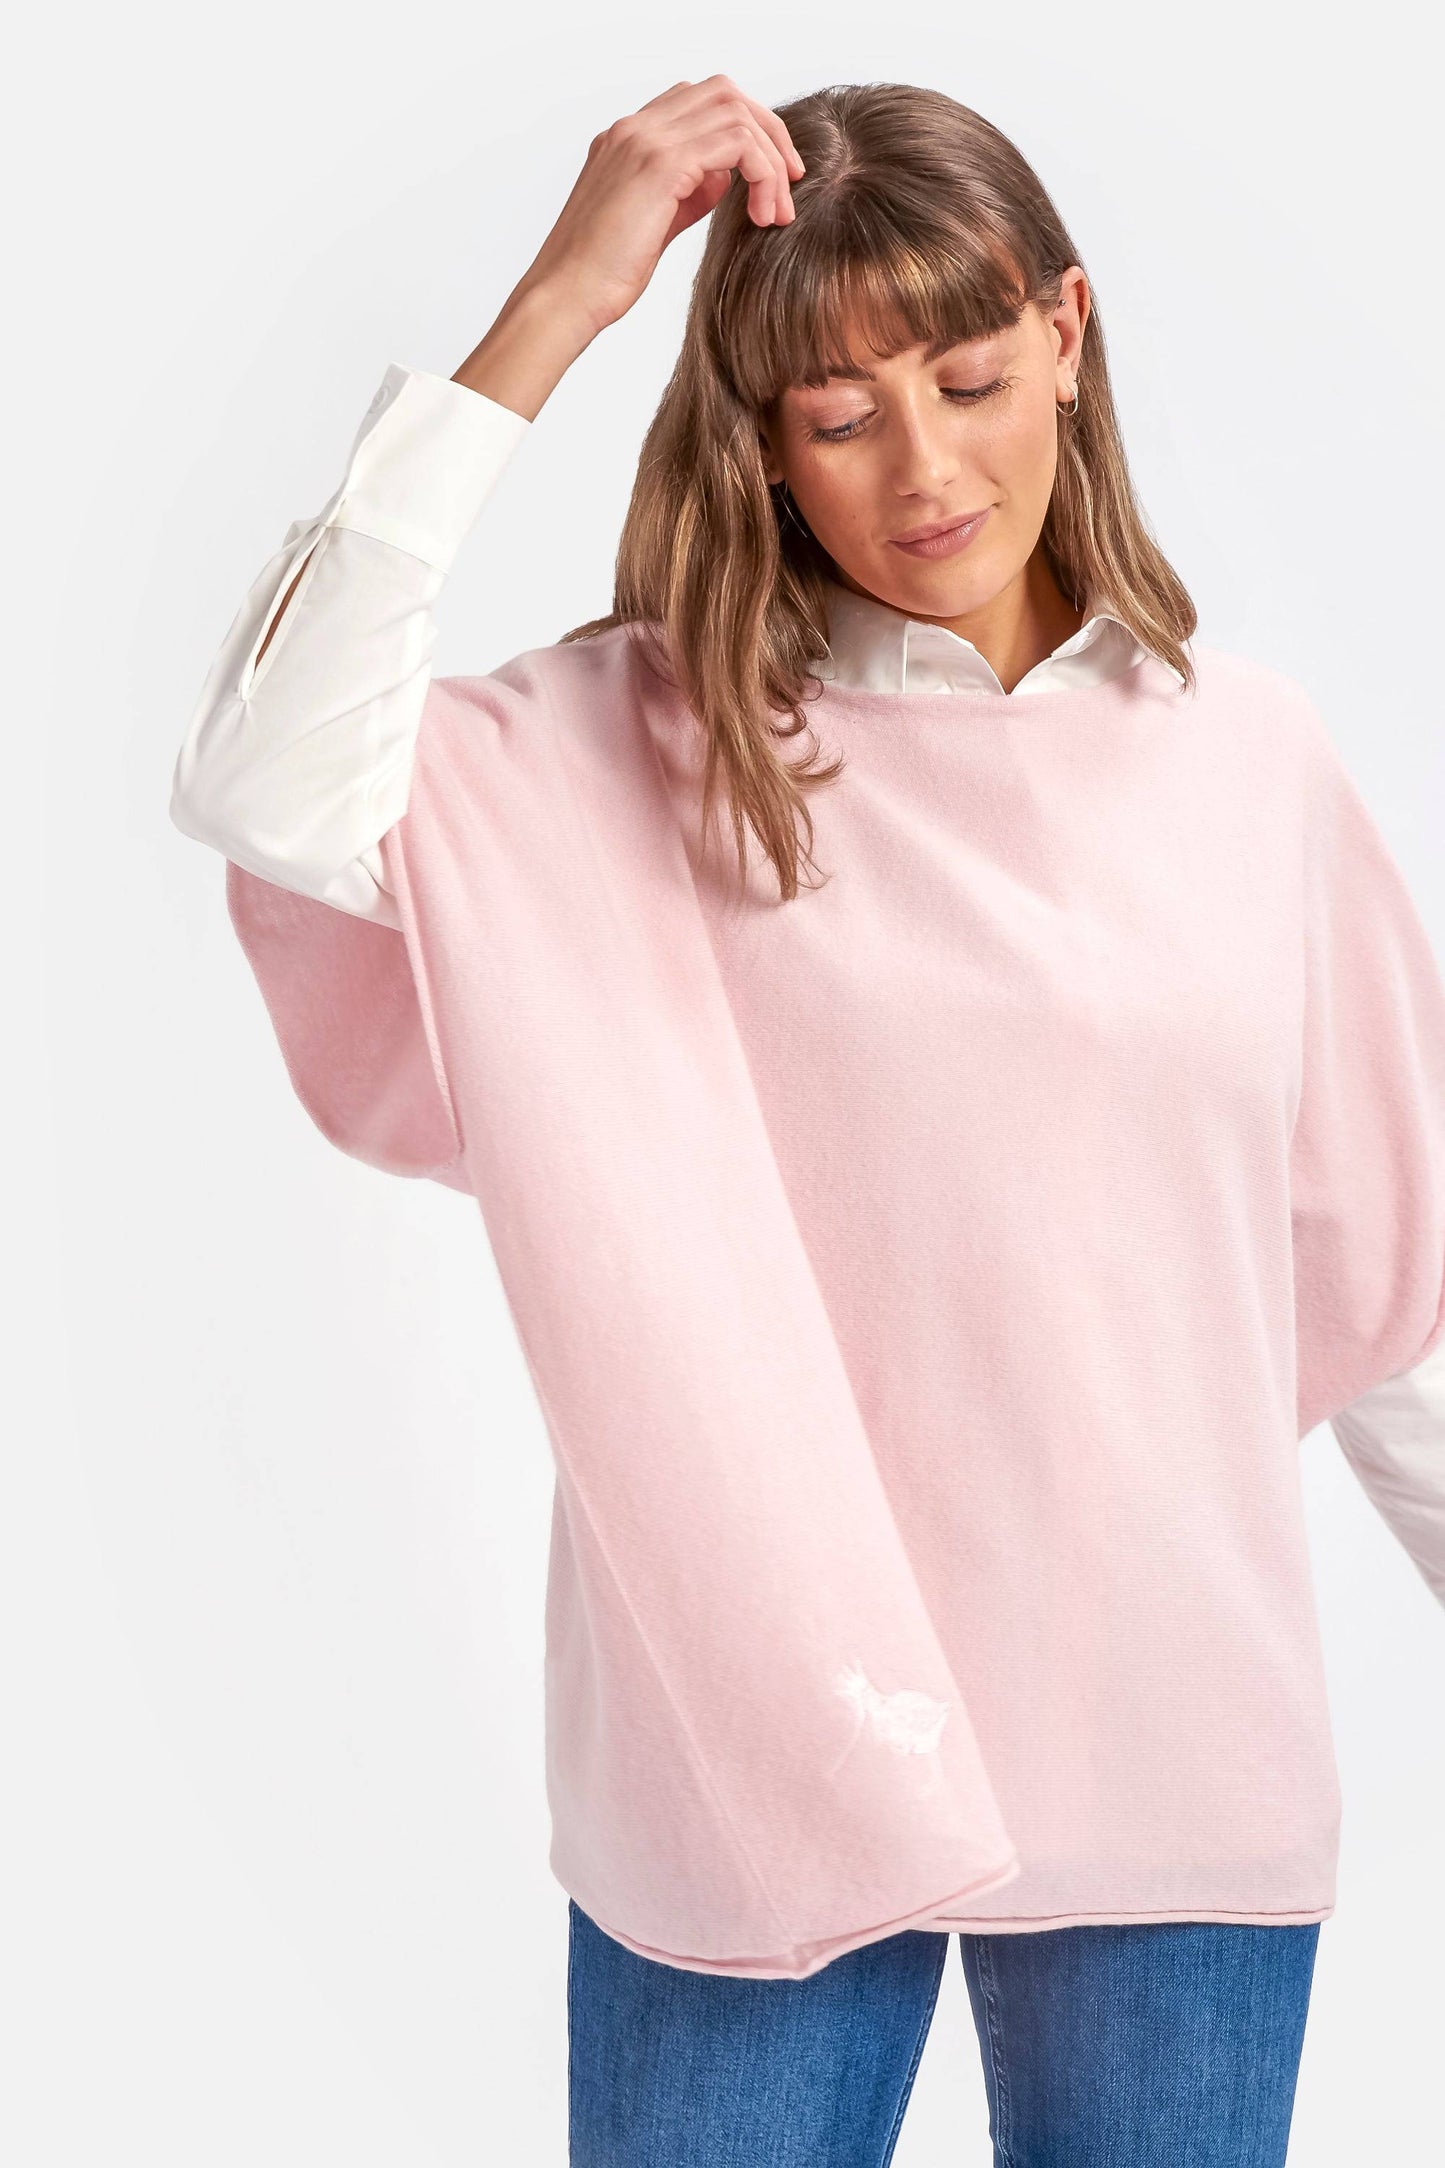 Cashmere & Merino Wool Boat Neck Poncho in Pale Pink By Woodcock & Cavendish for sale - Woodcock and Cavendish